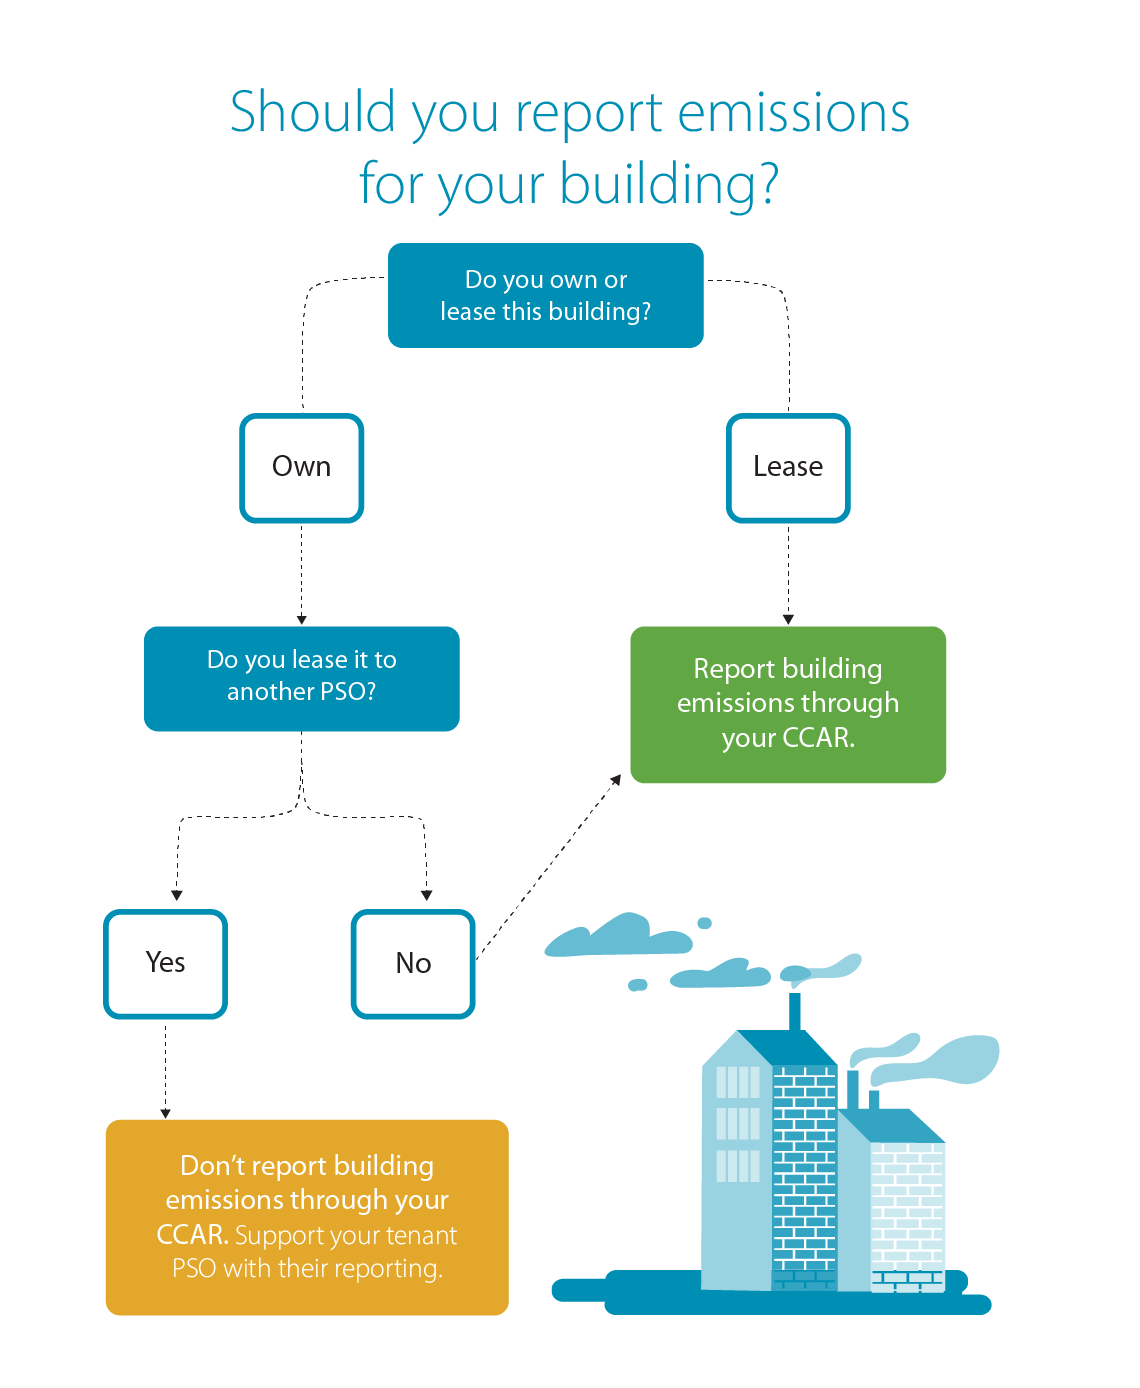 Flow chart describing when a building is considered in scope.